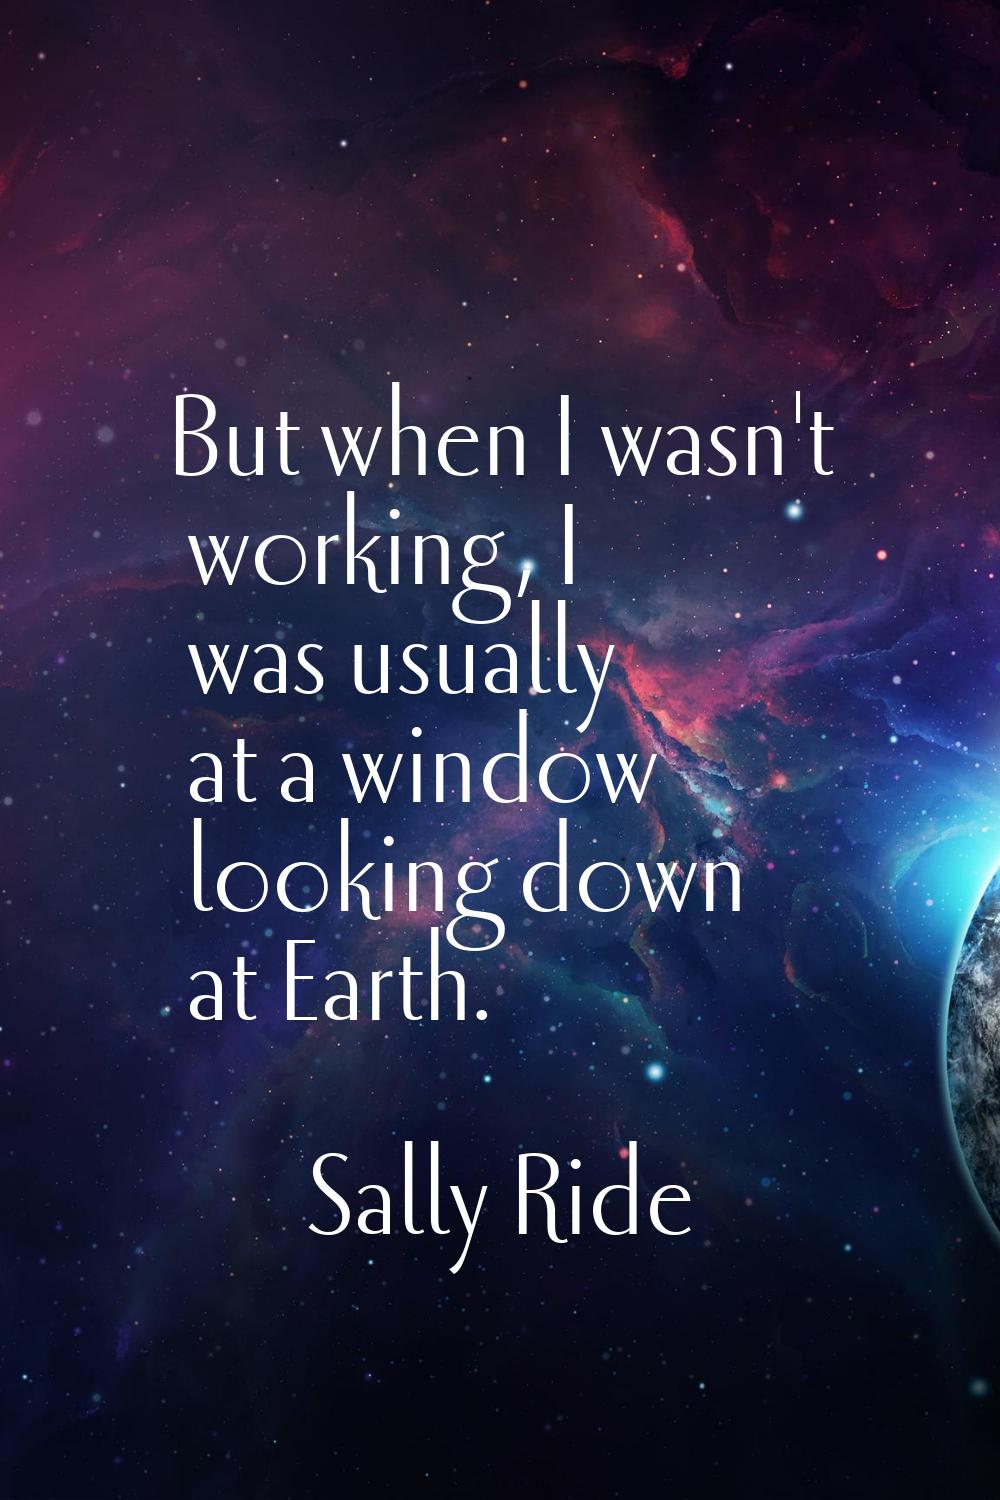 But when I wasn't working, I was usually at a window looking down at Earth.